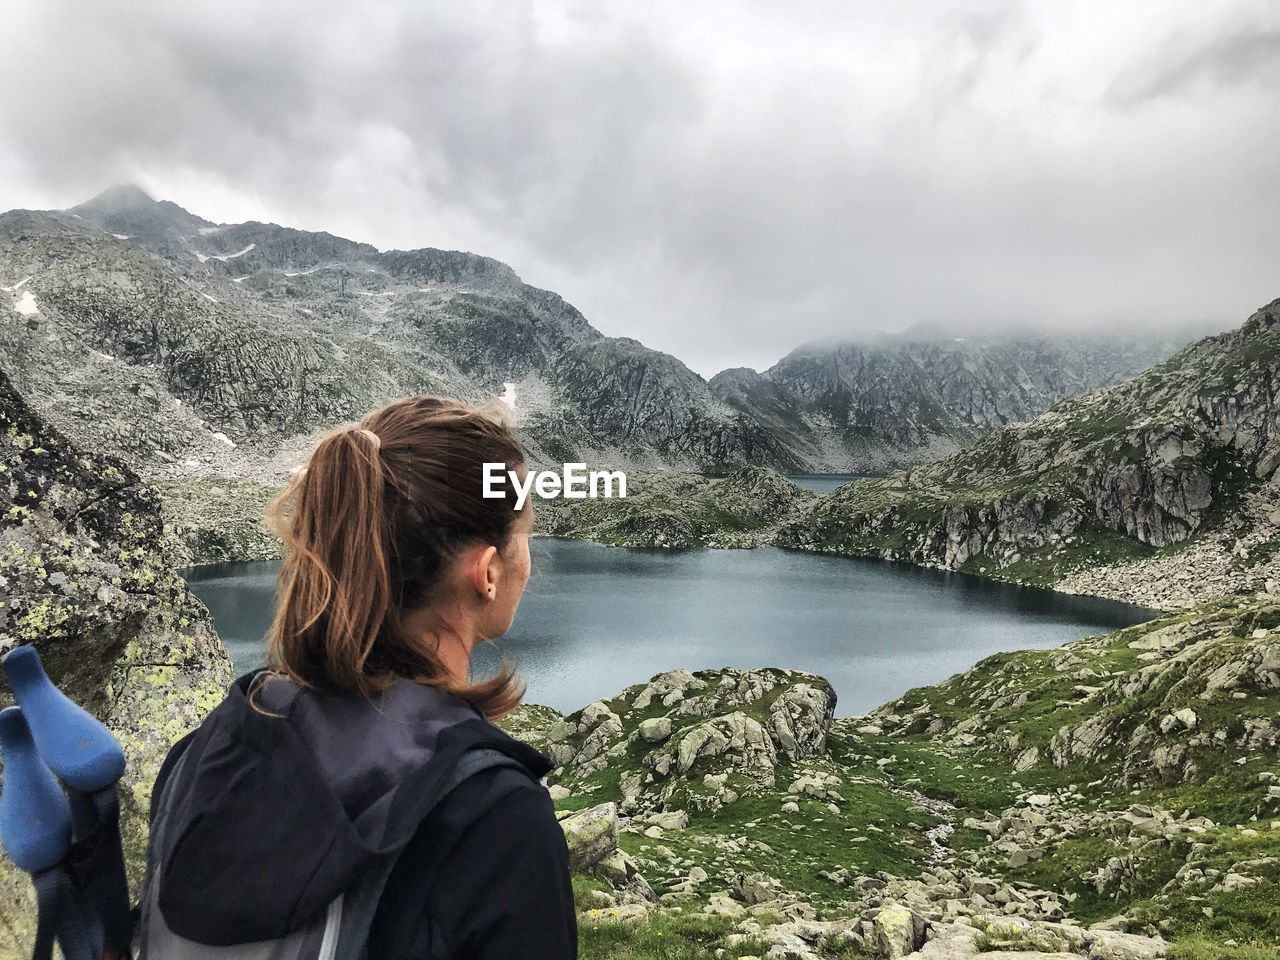 Woman looking at lake and mountains against cloudy sky